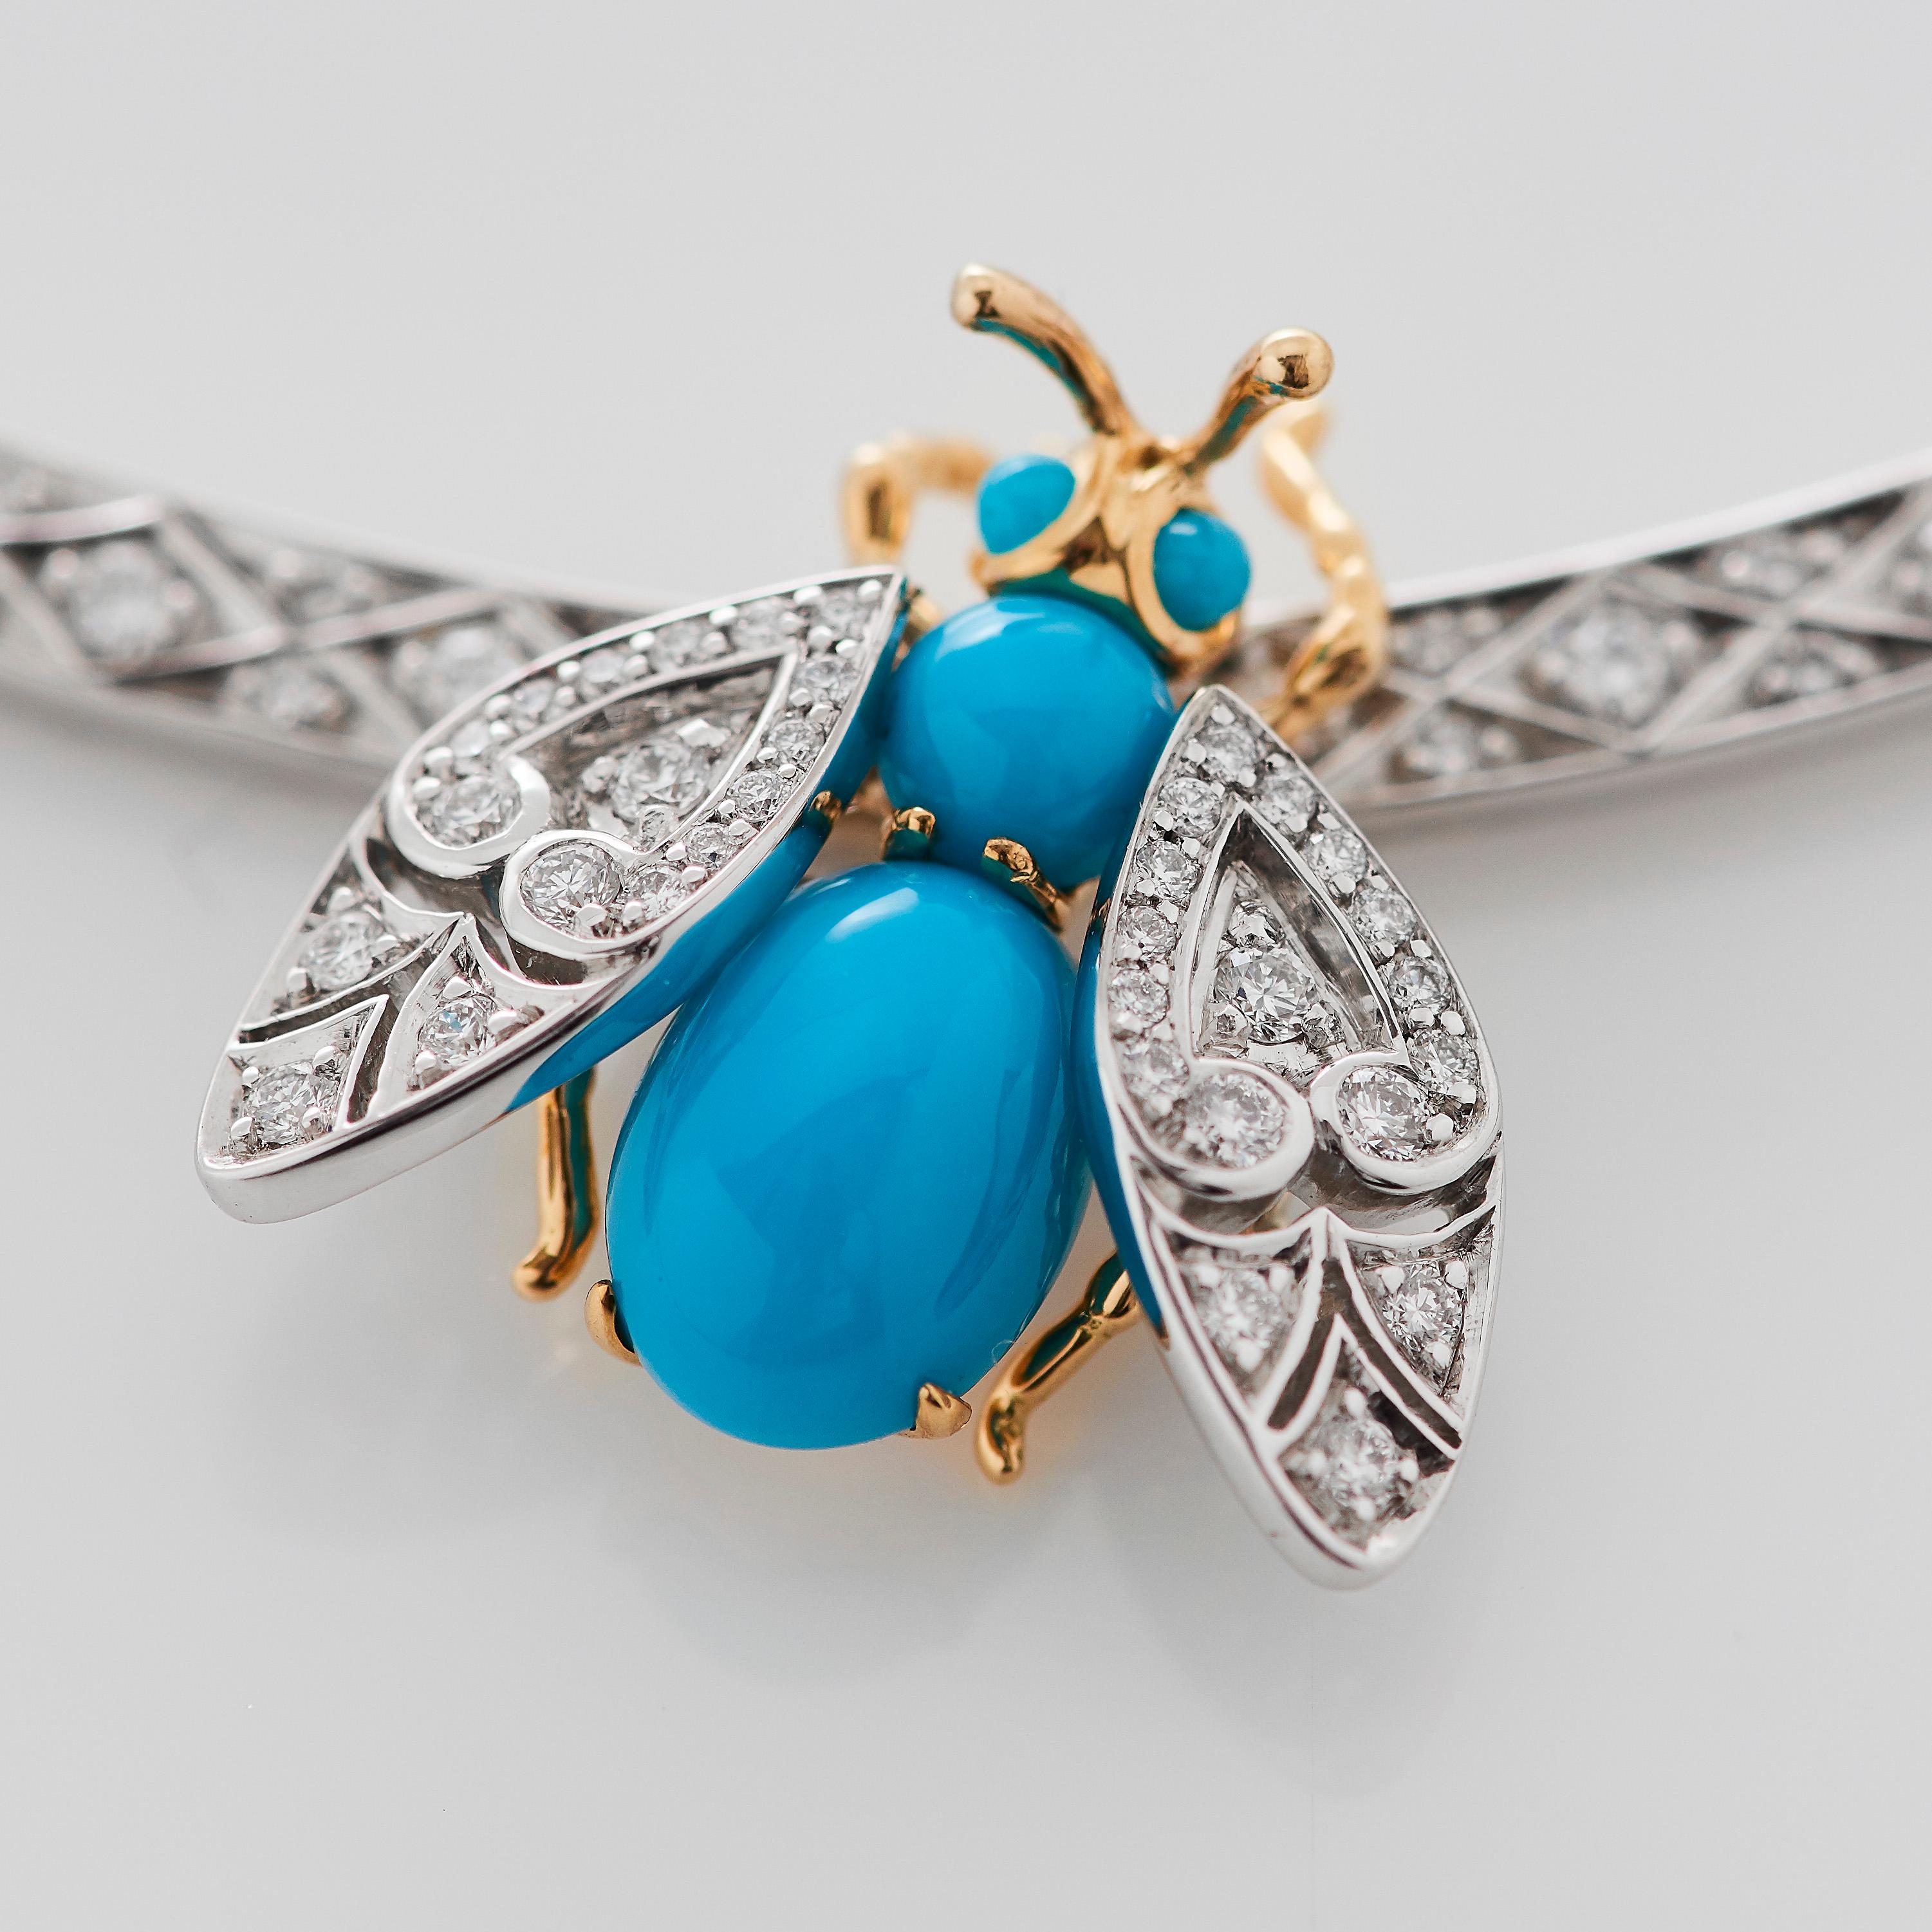 Garrard 'Enchanted Palace' 18 Karat White Gold Diamond Turquoise Bug Pendant In New Condition For Sale In London, London